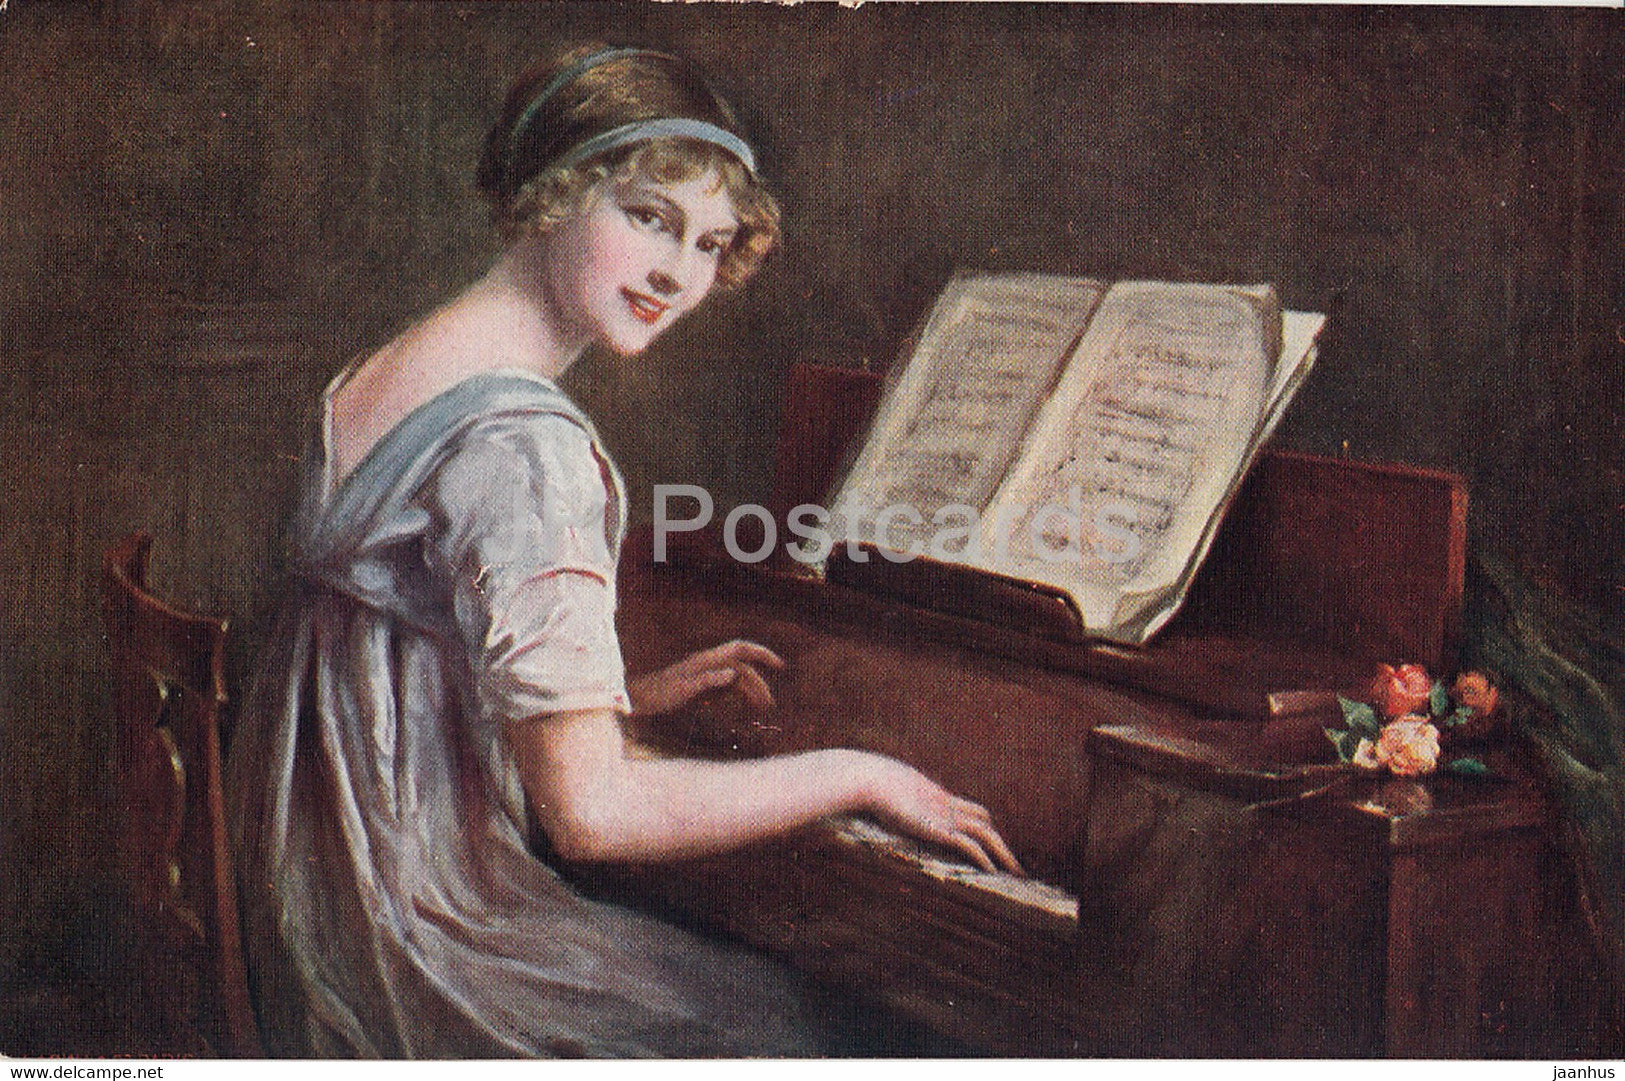 painting by Martin Kavel - Allegretto - piano - French art - I. Lapina - 1181 - old postcard - 1919 - France - used - JH Postcards